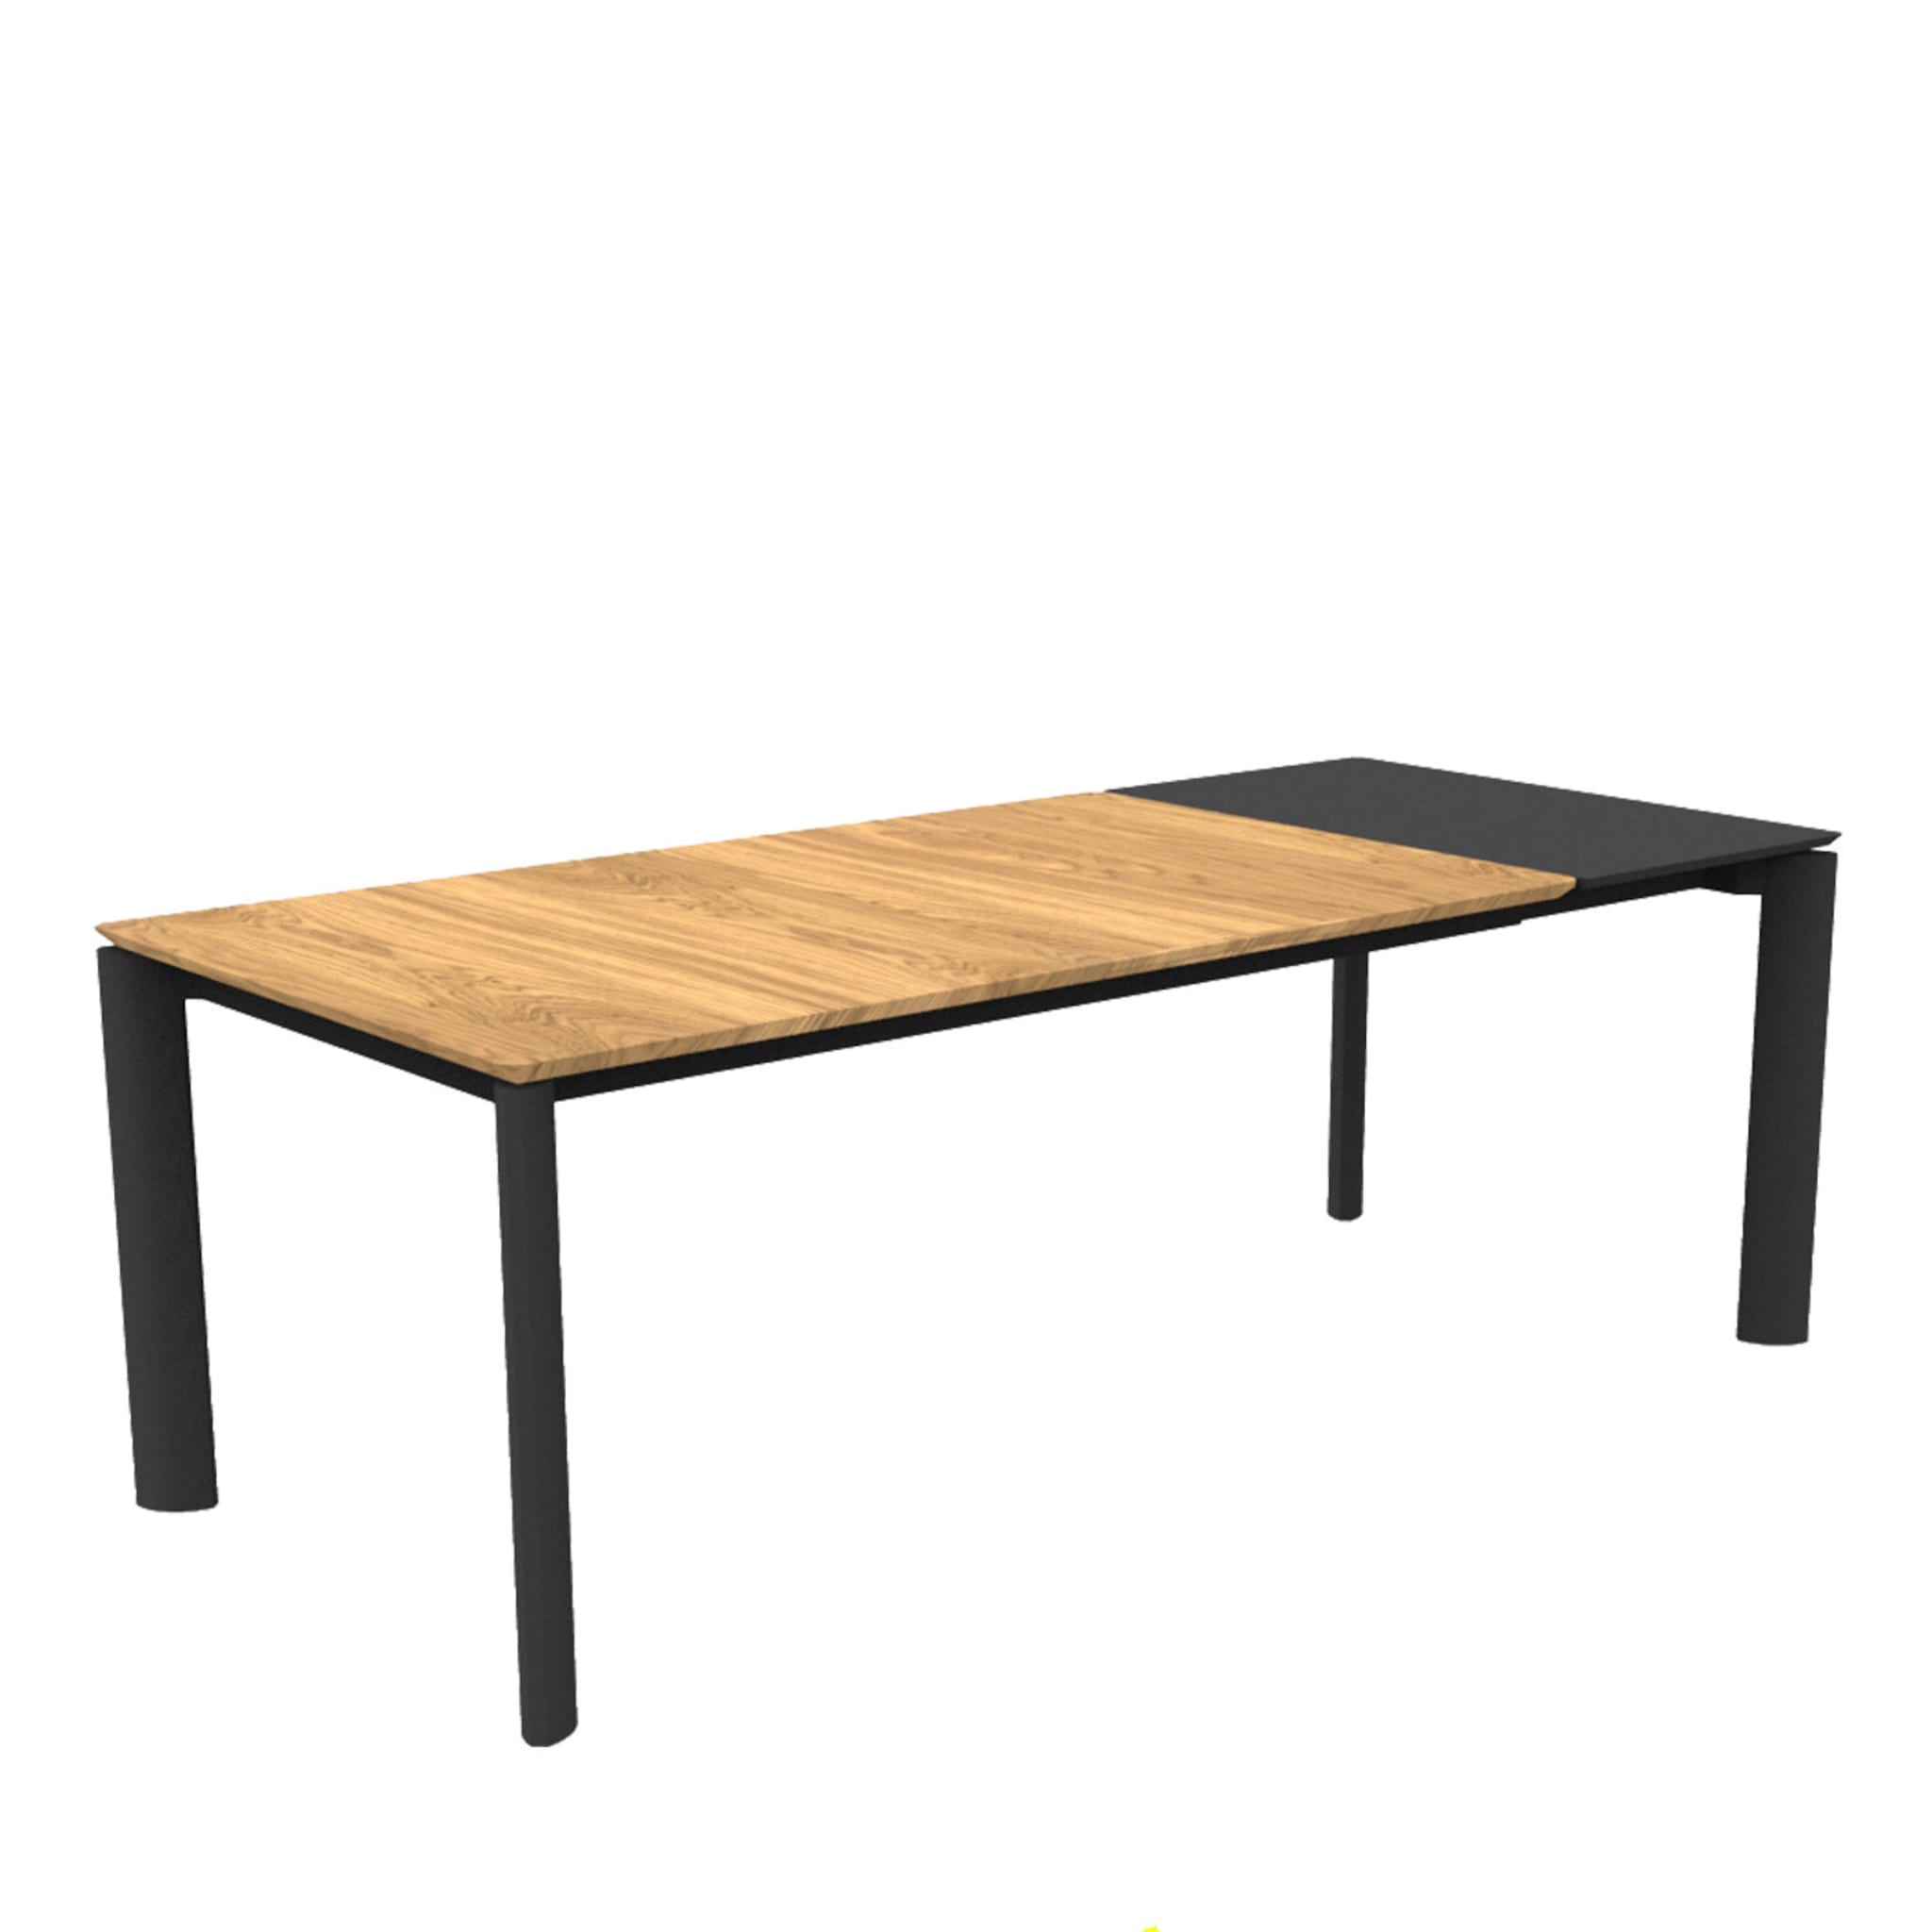 Domino Extendable Dining Table - Main view